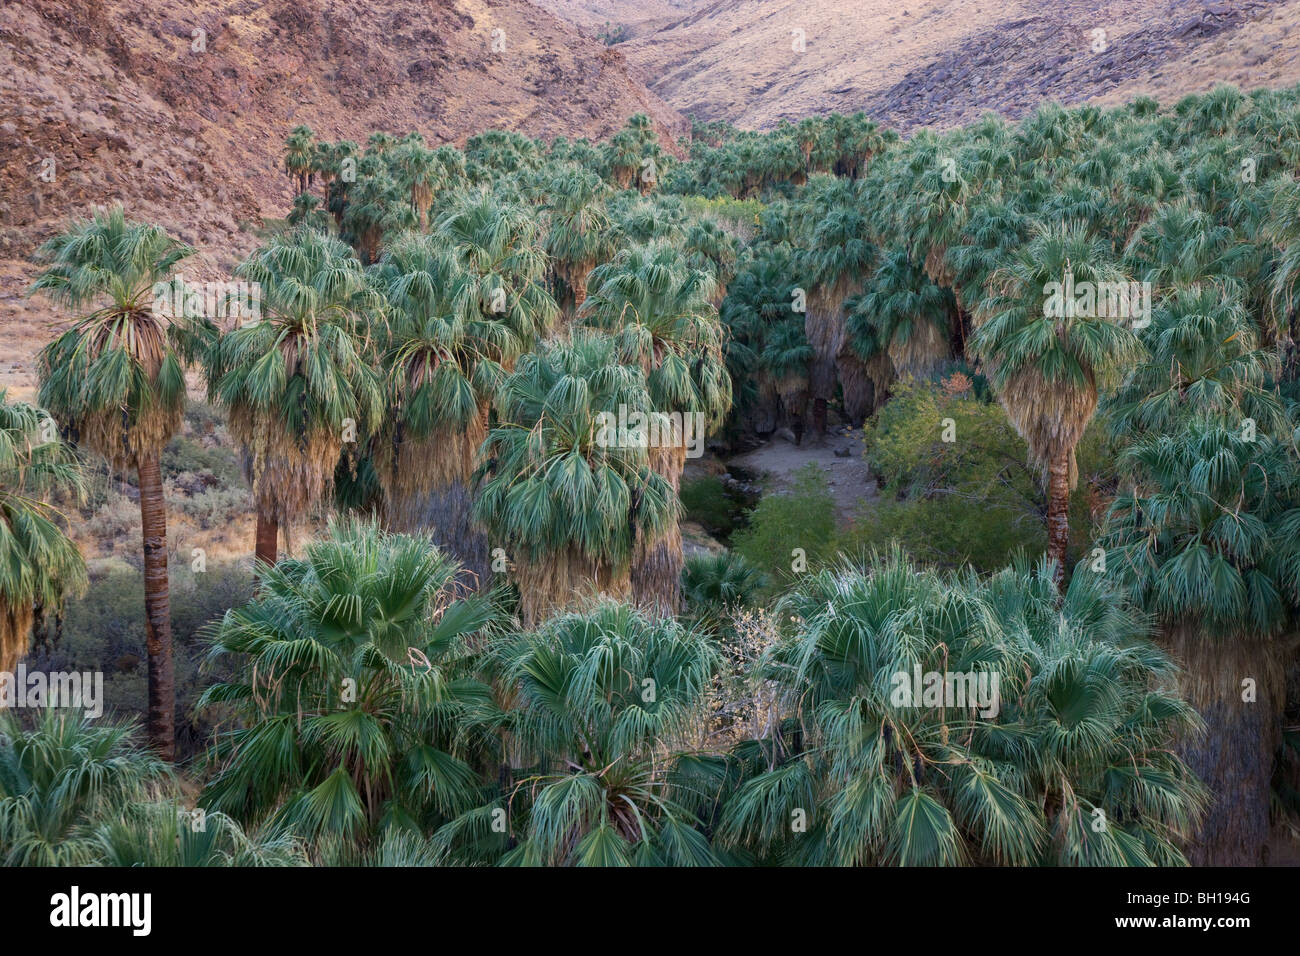 Palm Canyon, parte dell'Indian Canyon del Agua Caliente Indian Reservation, vicino a Palm Springs, California. Foto Stock